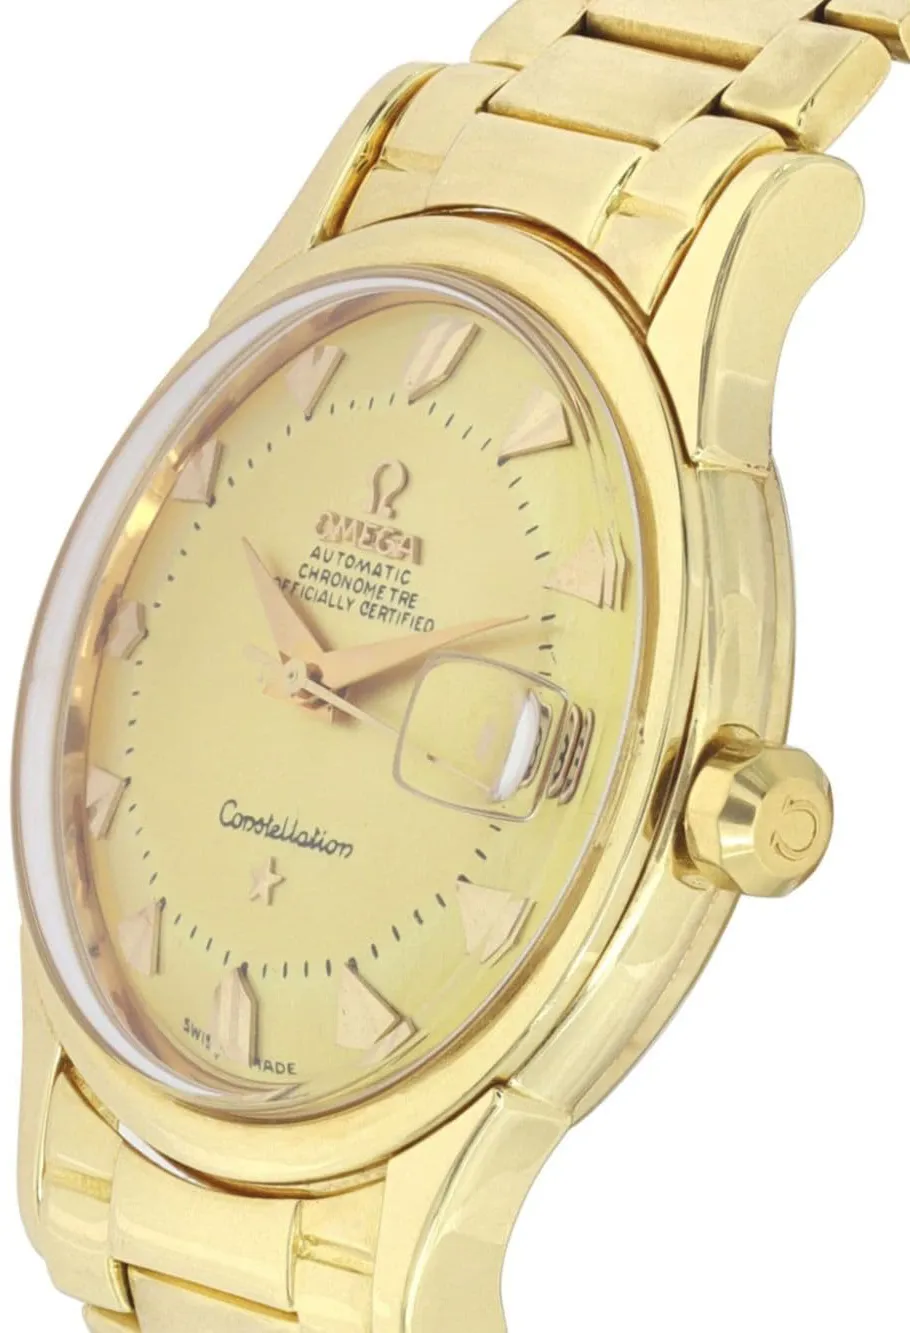 Omega Constellation 2943 / 2954 SC 35mm Yellow gold Gold